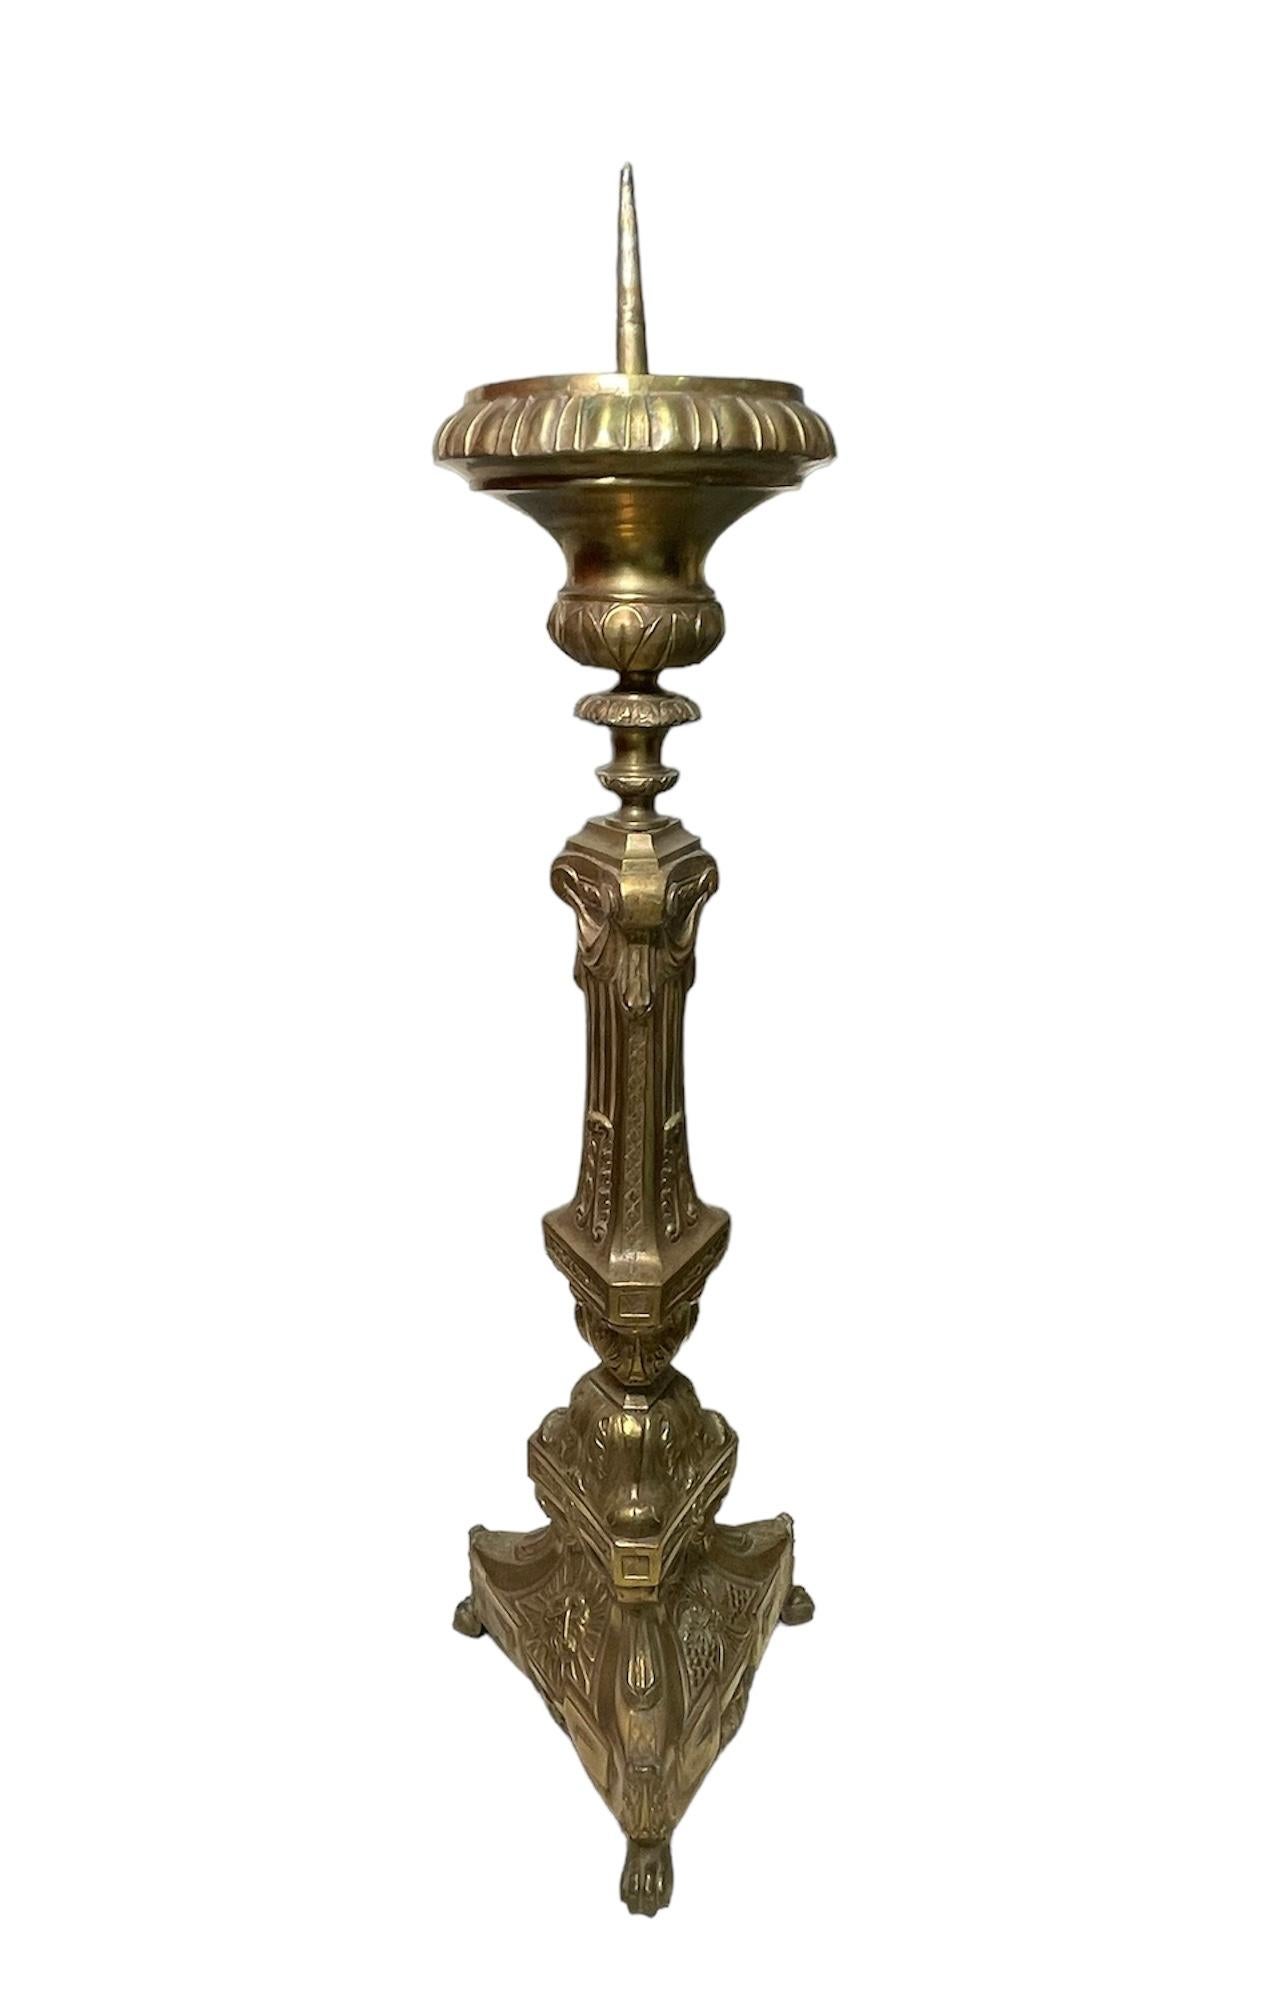 This an Empire Style Bronze Candle holder or Candlestick. It depicts a gilt bronze candle holder decorated with a high relief of wheat branches, grapes vines, acanthus leaves, bay leaves and swags. The candle holder is supported by three lion paws.